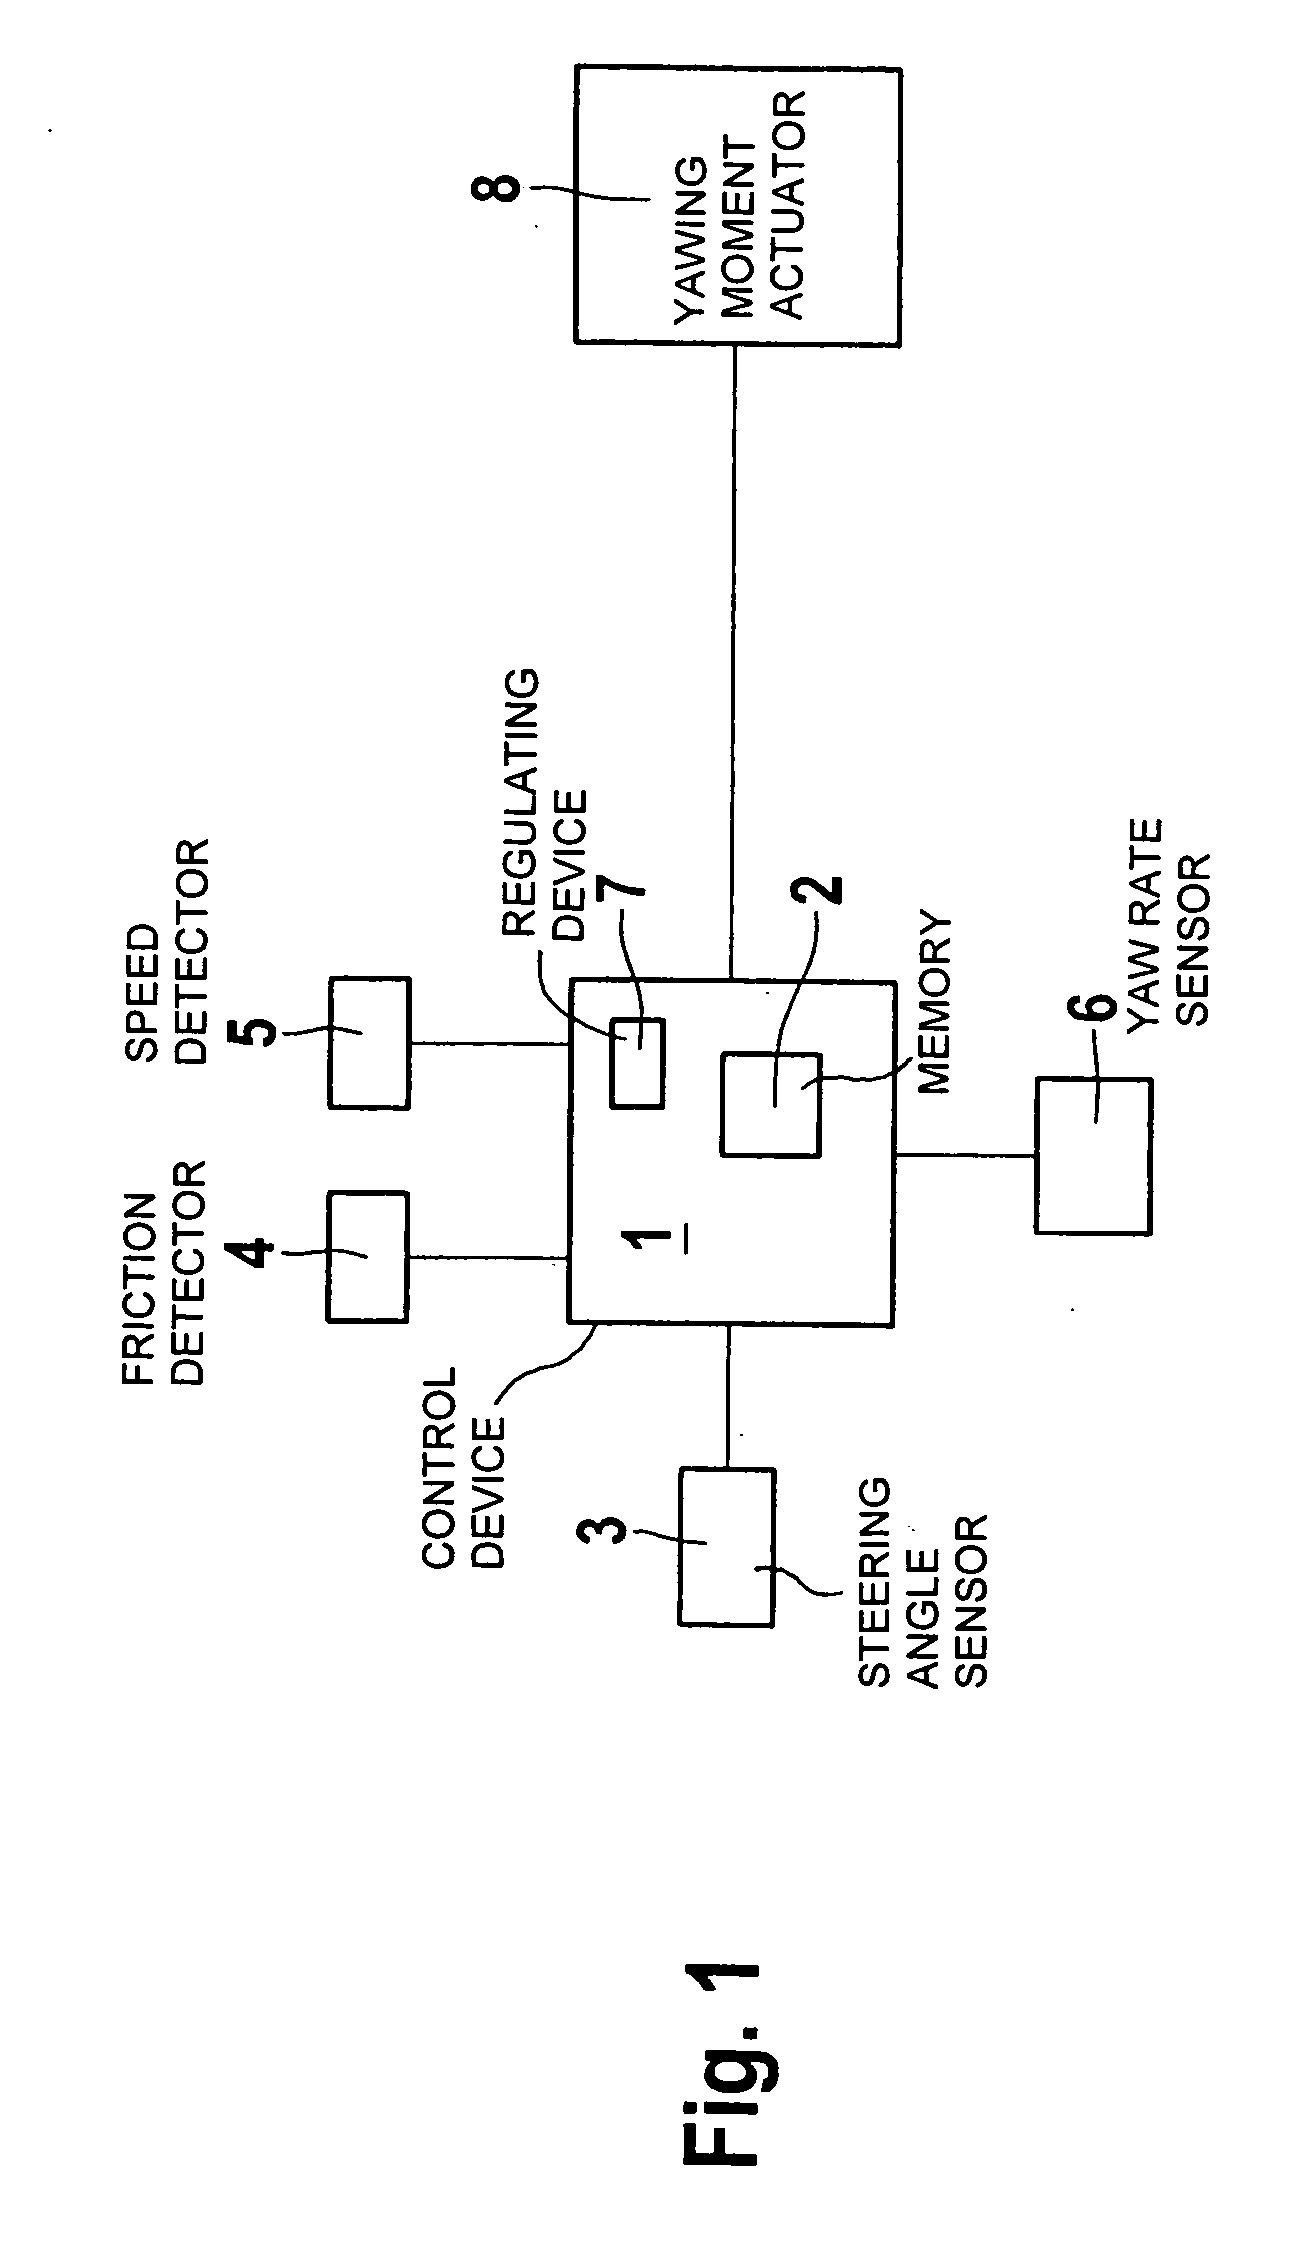 Method and system for controlling a yawing moment actuator in a motor vehicle